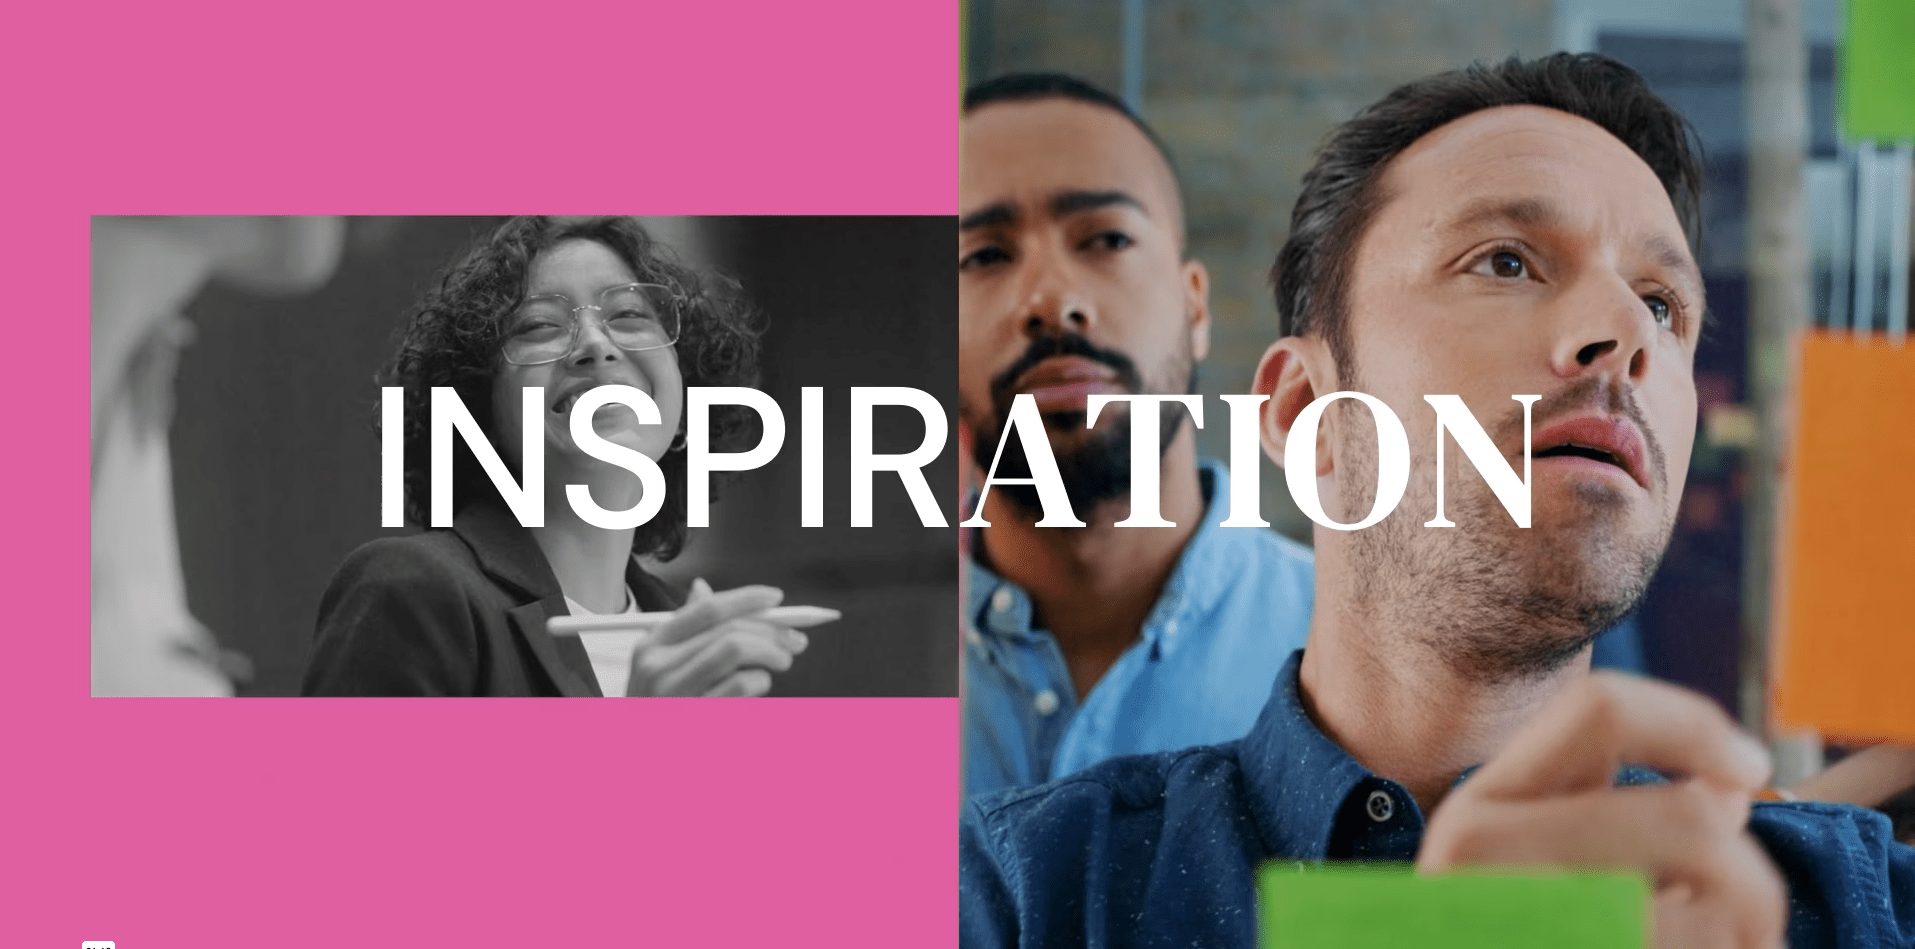 Images of people with the word Inspiration overlayed.